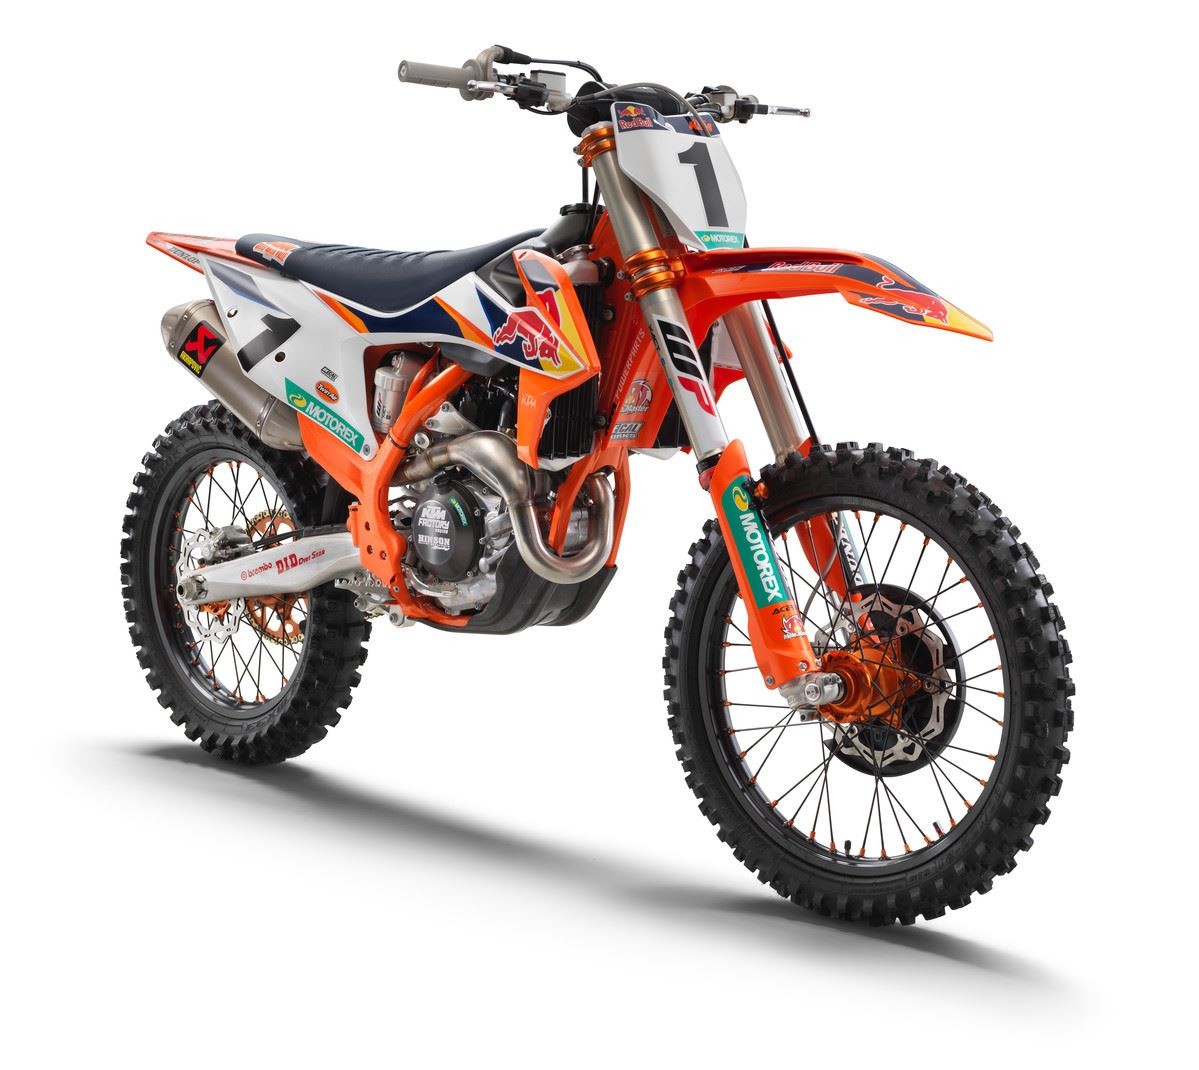 KTM Releases 2020 450 SX-F Factory Edition - Racer X